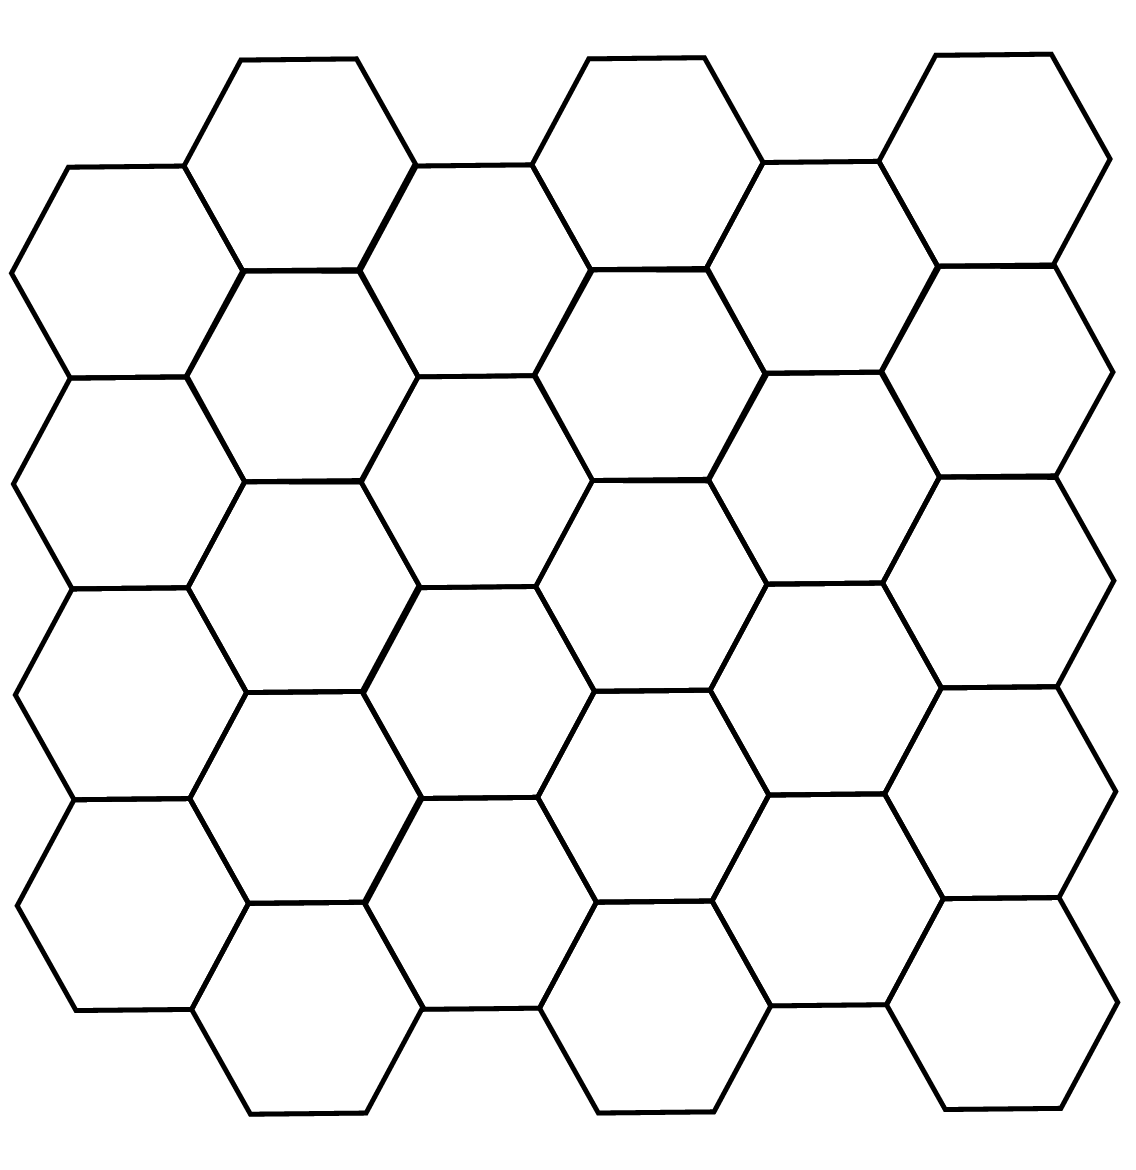 A tiling of 27 identical hexagons that looks like part of a honeycomb. There are six vertical columns of hexagons in the tiling and the tiling has a horizontal line of symmetry. The first, third, and fifth columns each have four hexagons. The remaining columns each have five hexagons.